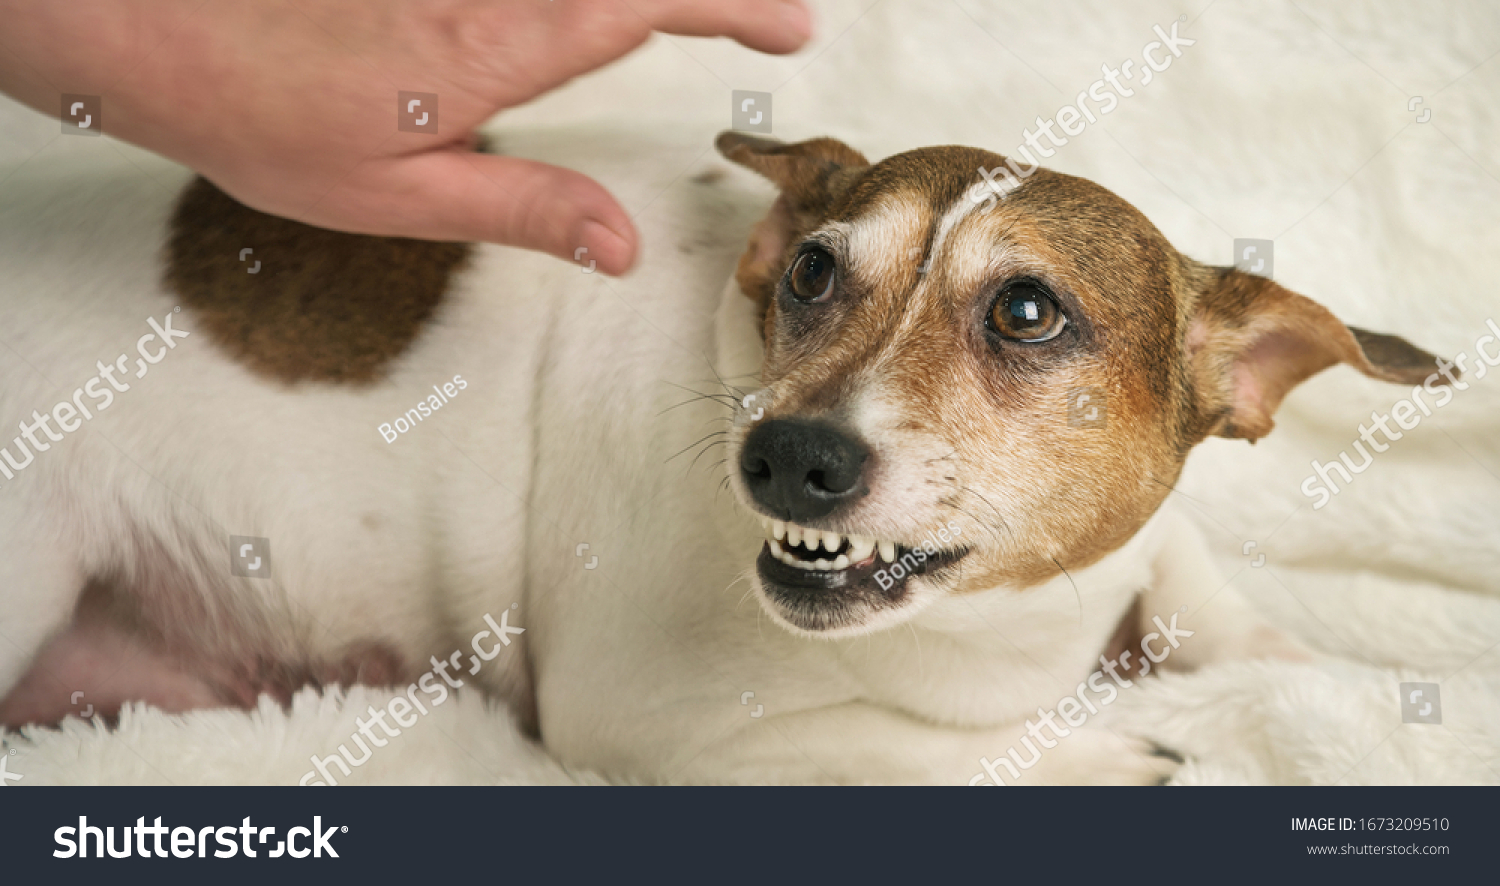 beautiful small white dog with brown spot lies on white towel and growls at lady hand over animal back at home close view #1673209510